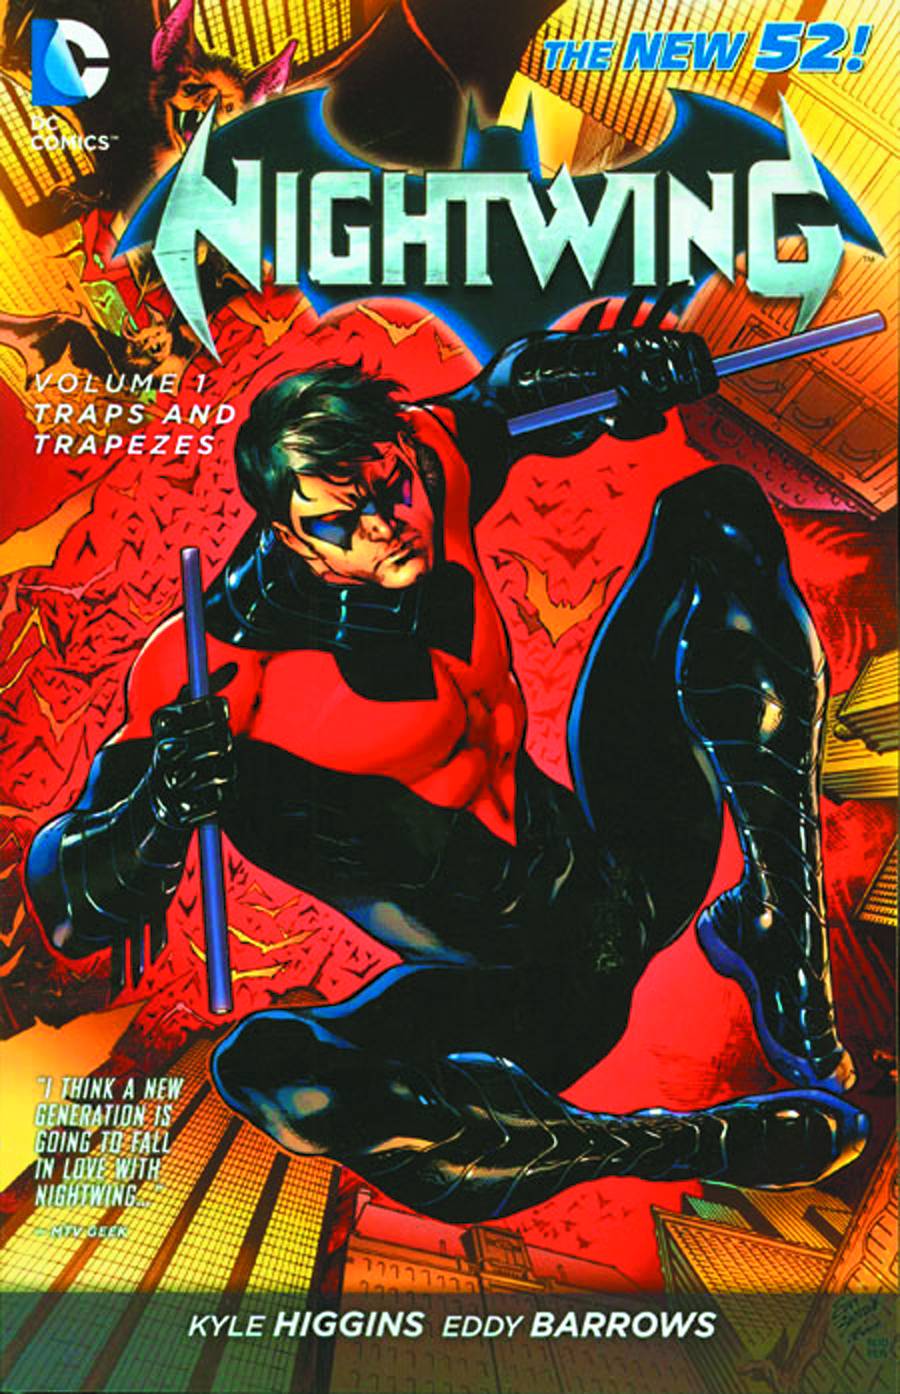 Nightwing Tp Vol 01 Traps And Trapezes (New 52)